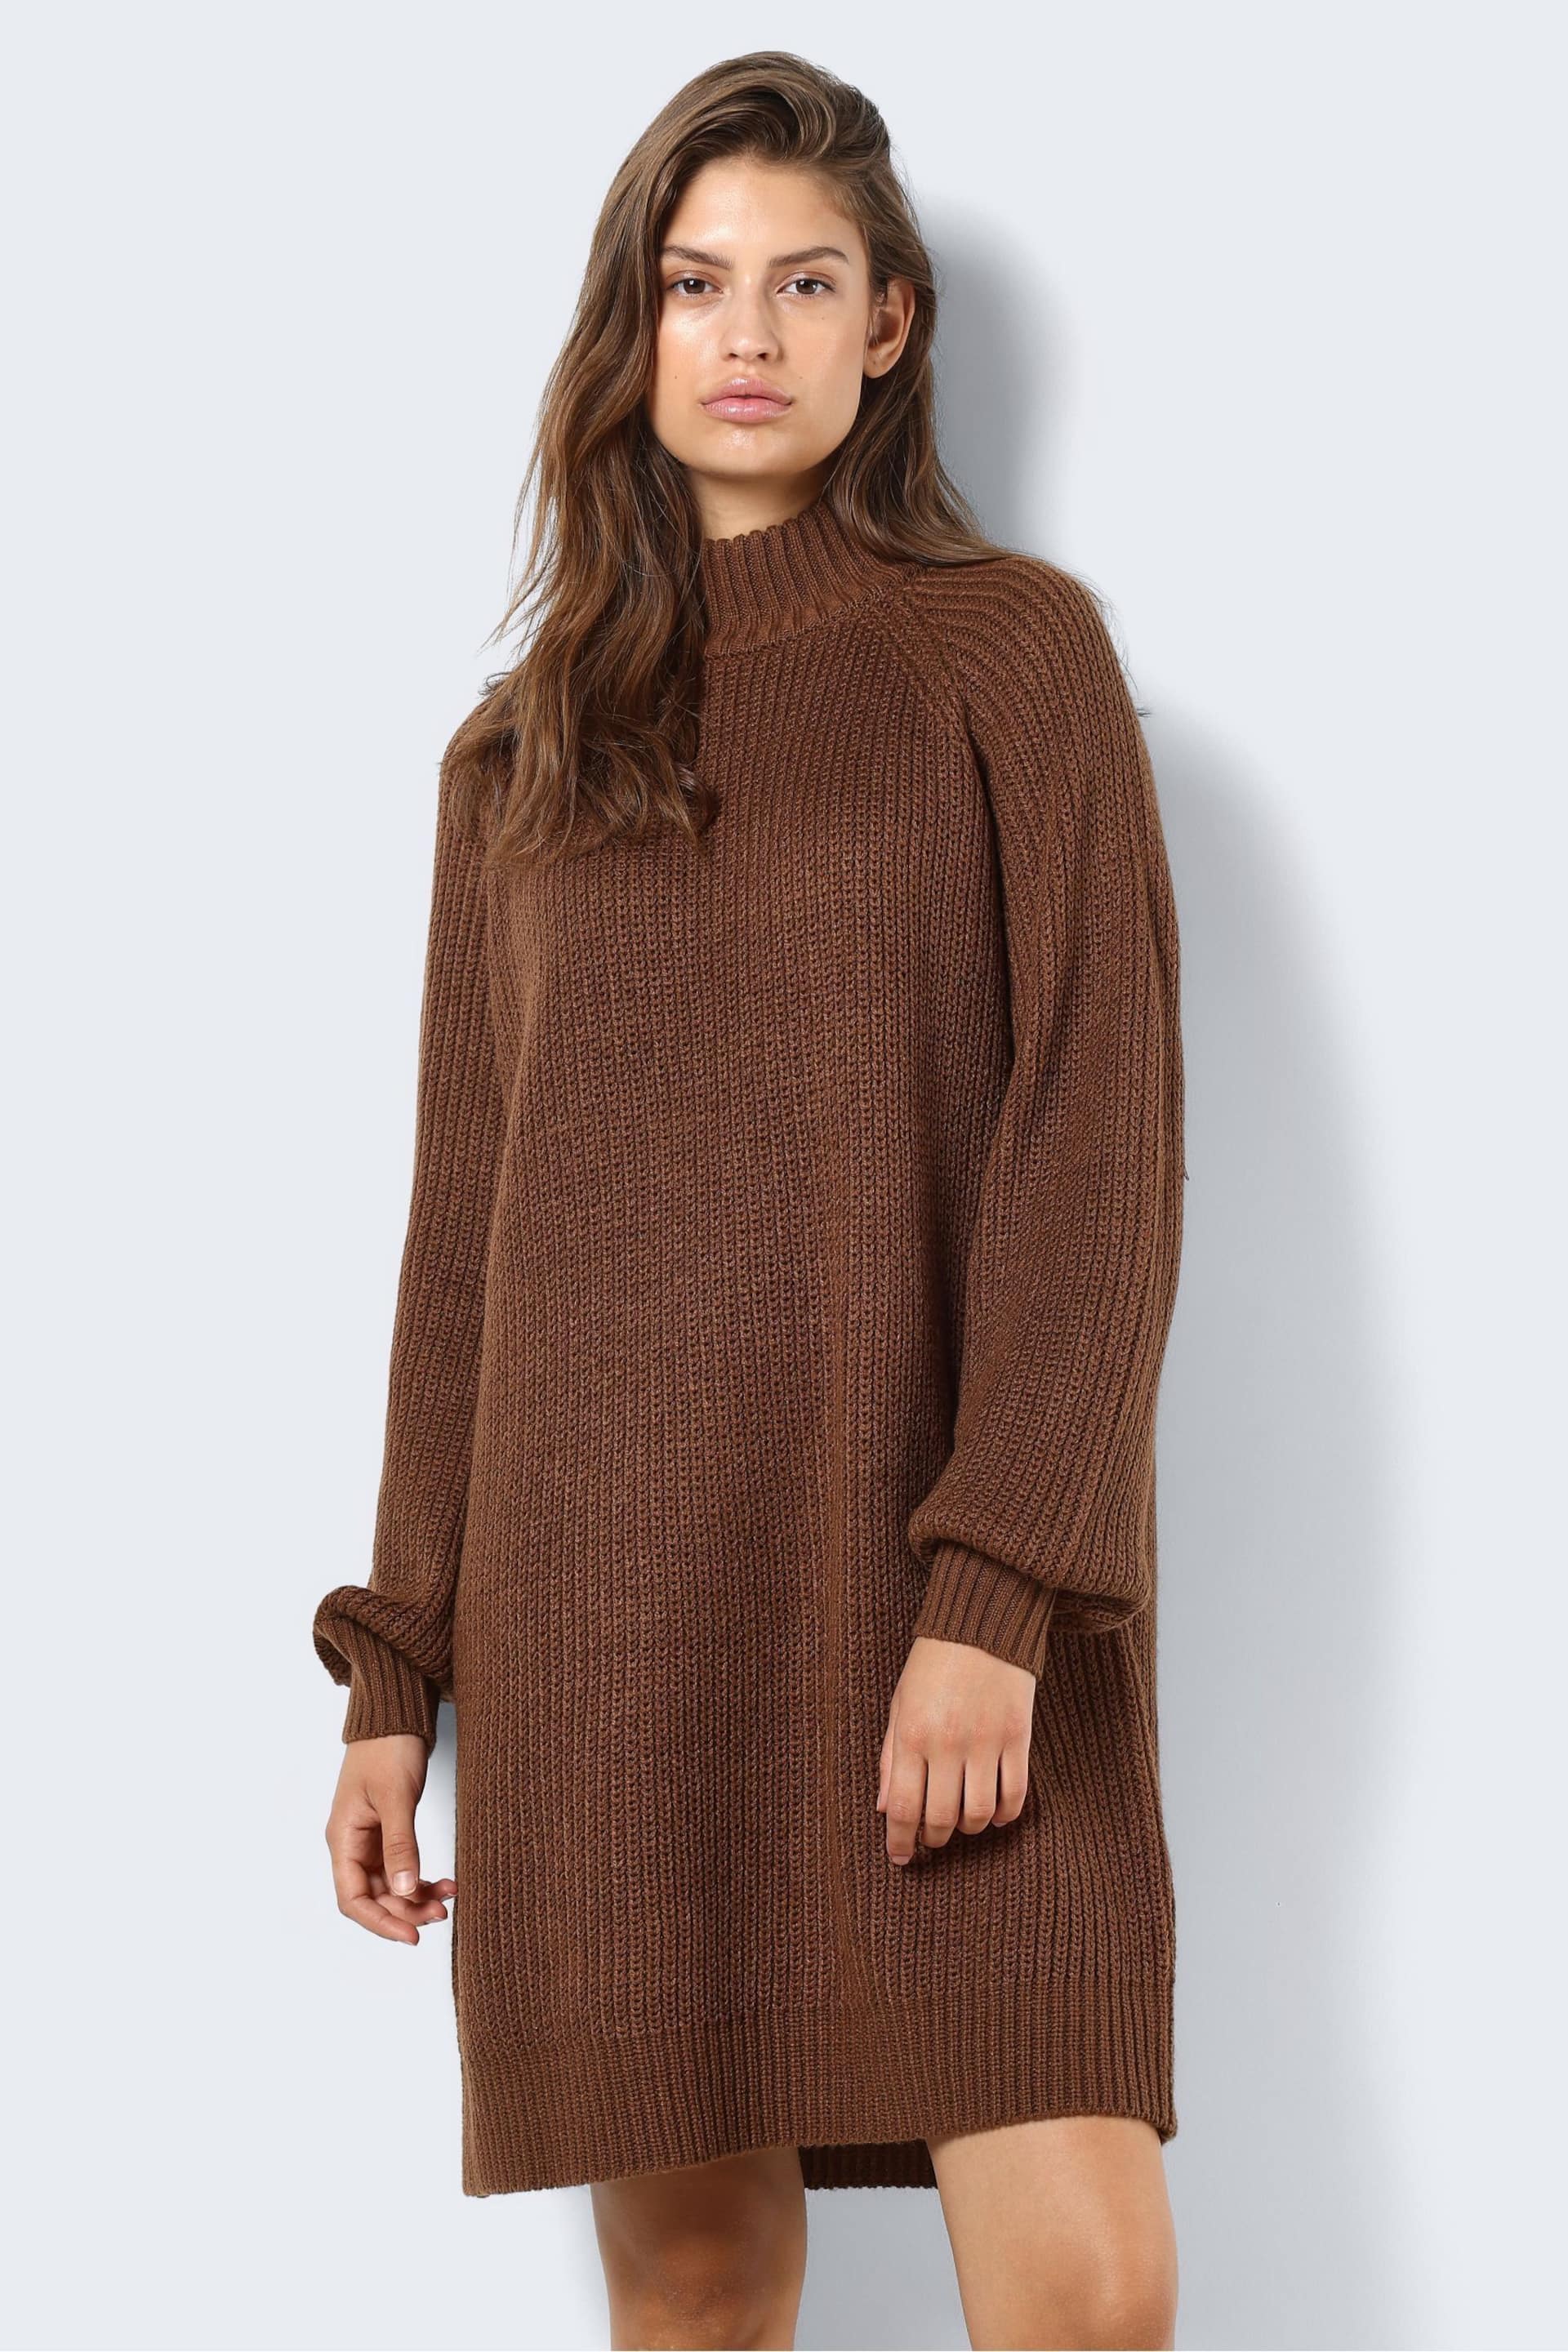 NOISY MAY Brown High Neck Knitted Jumper Dress - Image 1 of 5